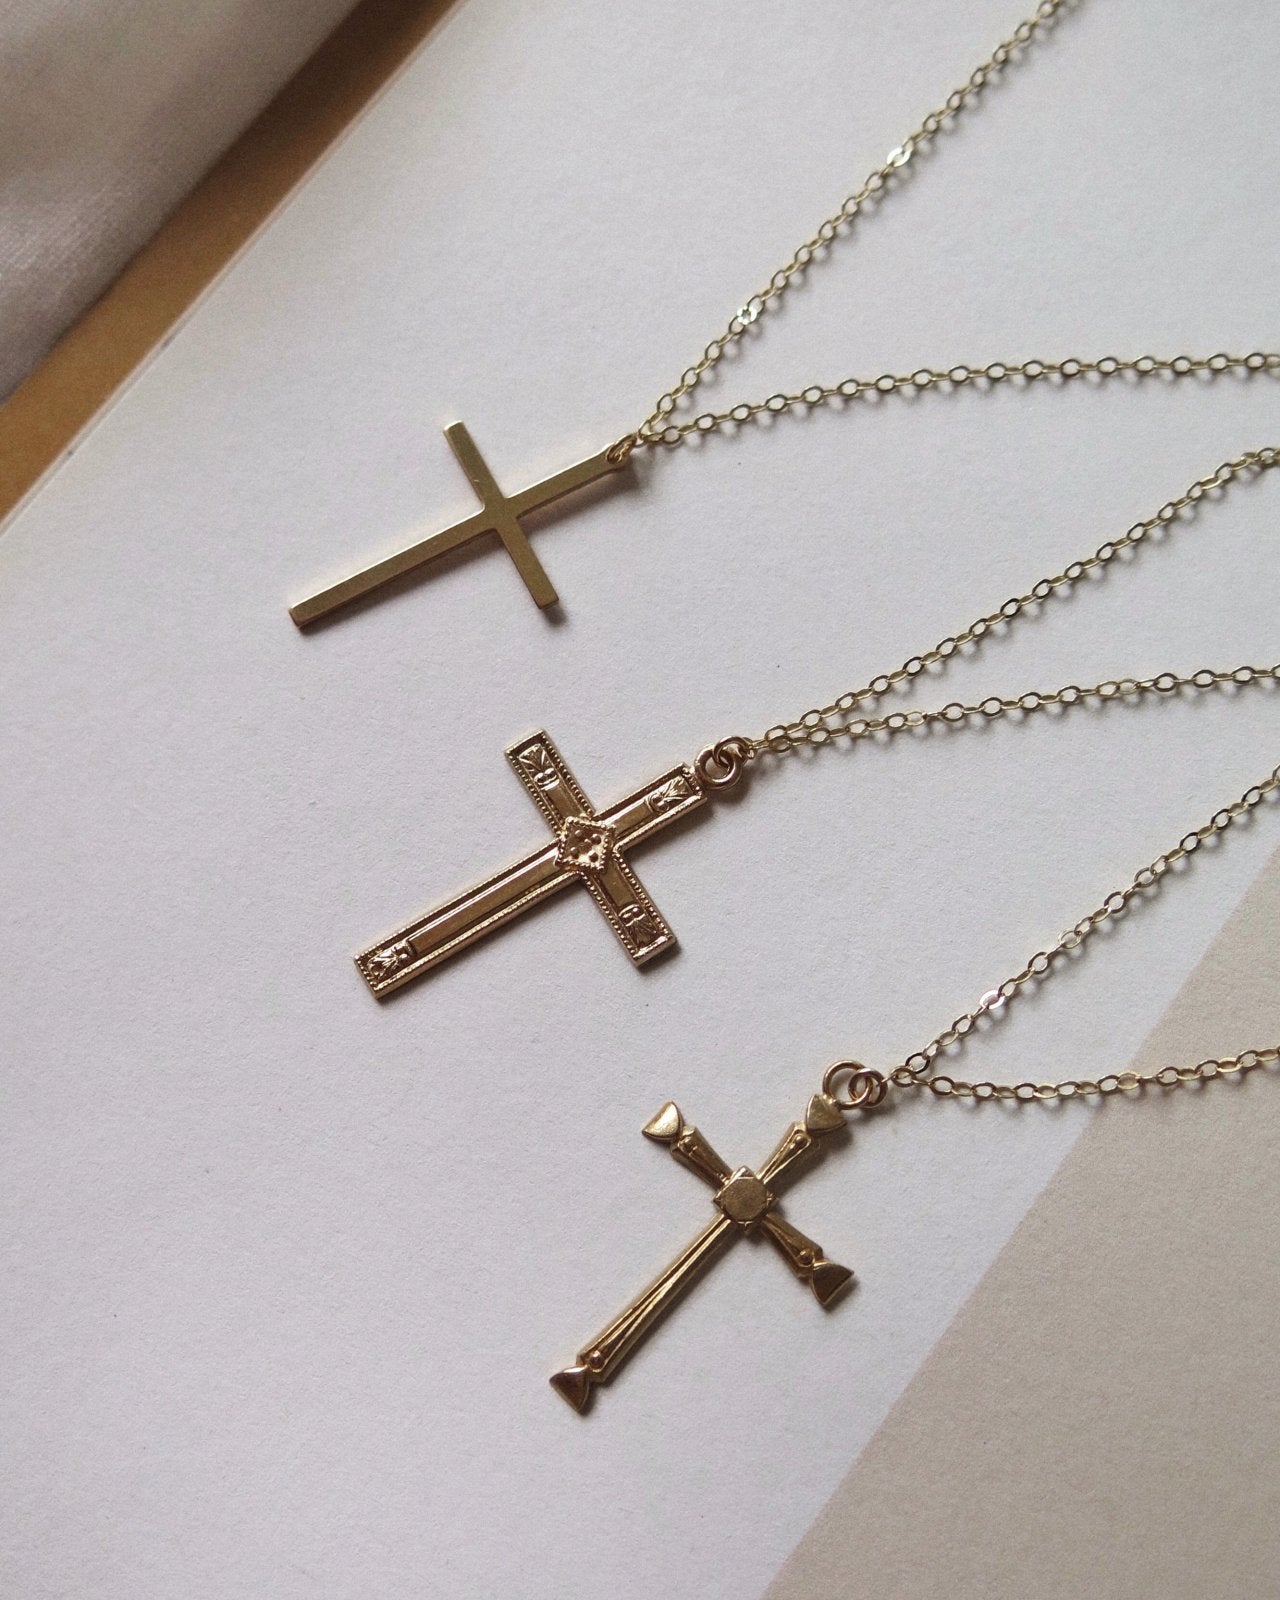 Load image into Gallery viewer, LARGE CROSS NECKLACE - The Littl - Deluxe Chain - 14k Yellow Gold Fill
